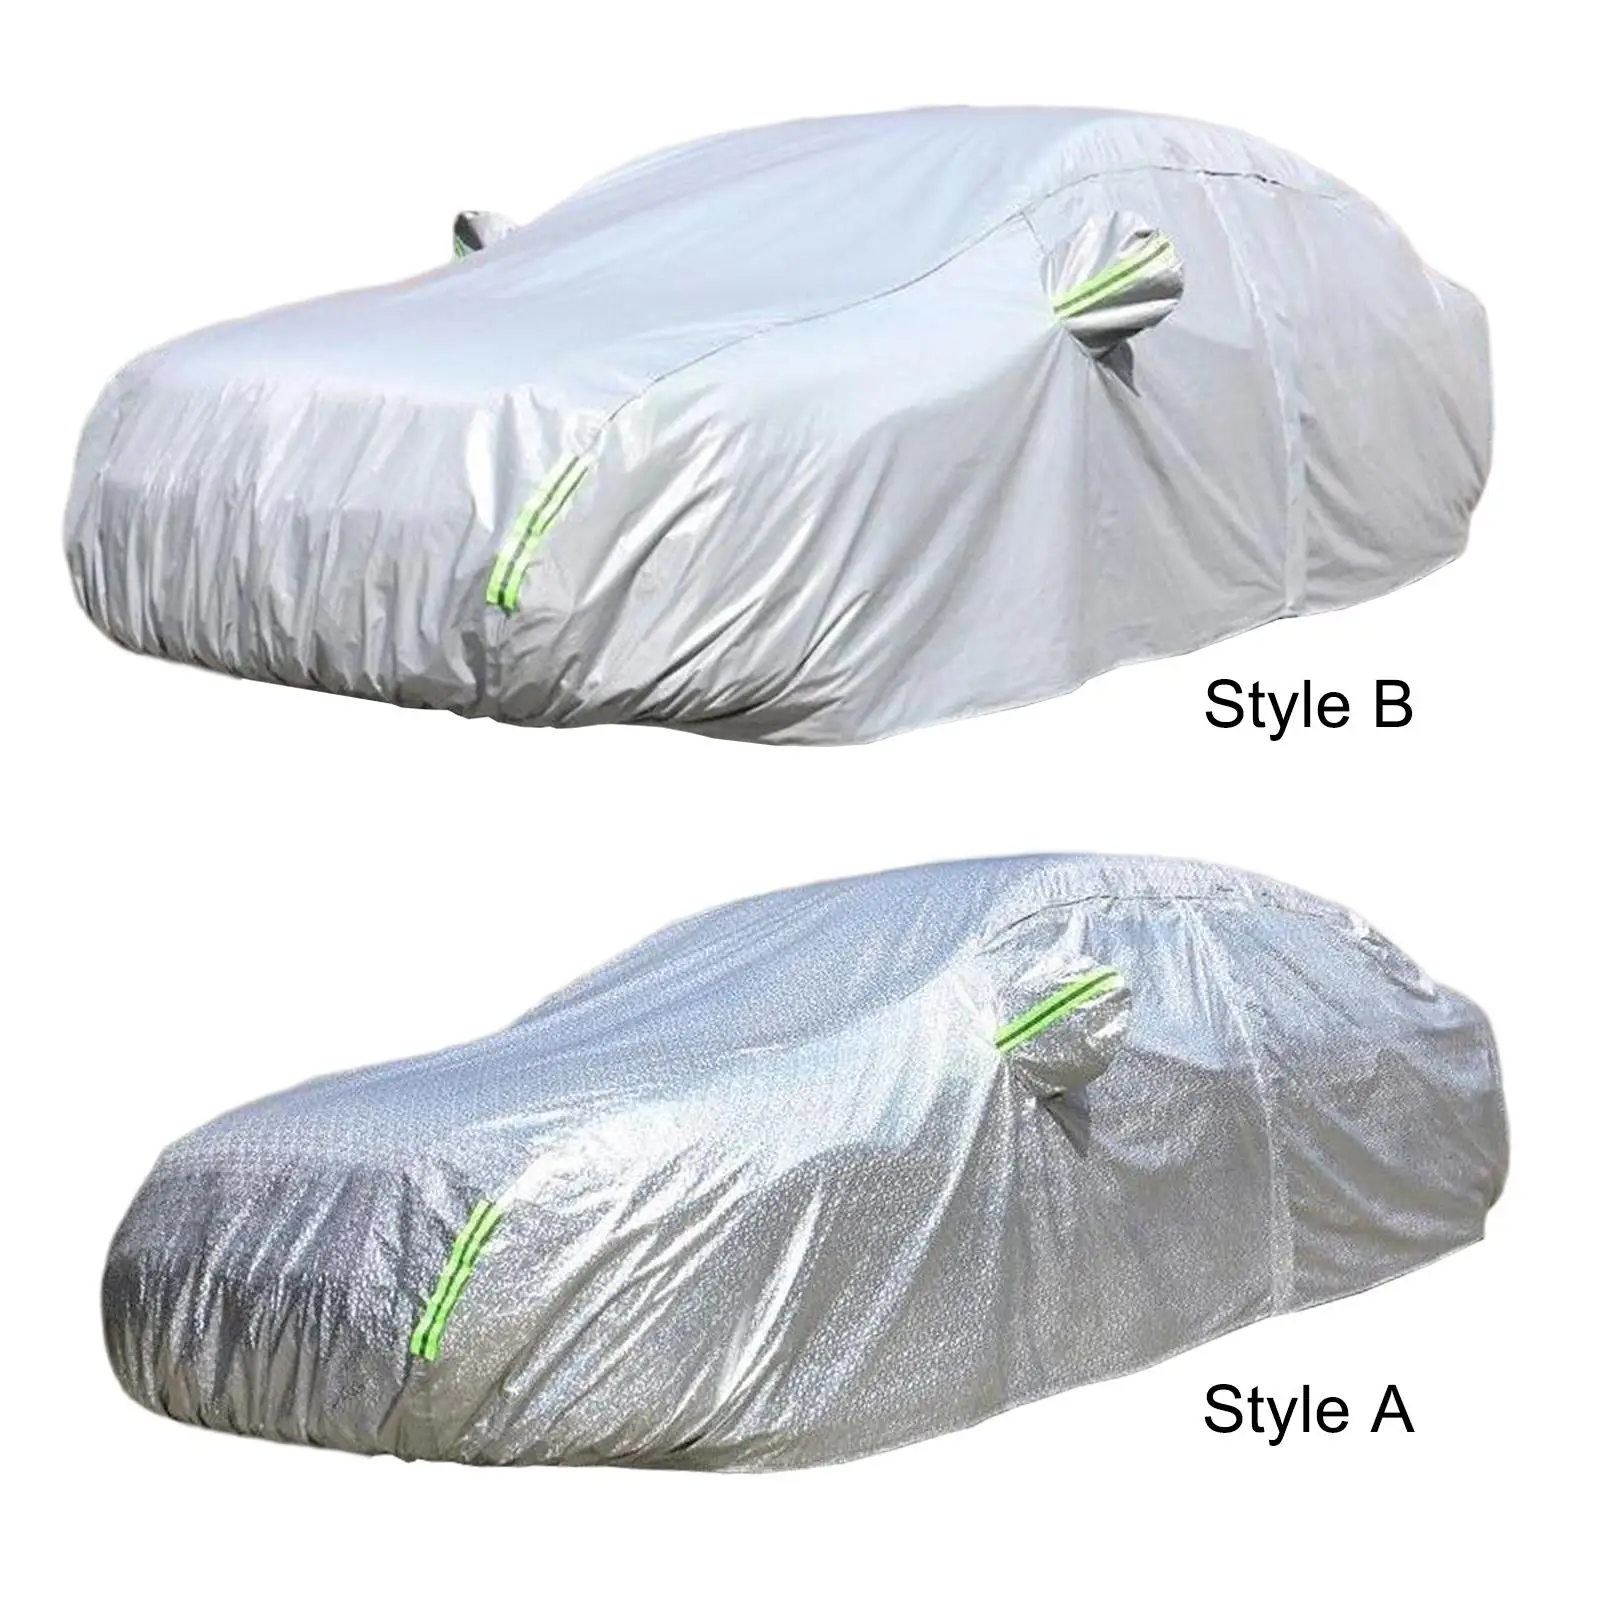 Full Exterior Covers for Atto 3 Yuan Plus WaterWeather Professional Design